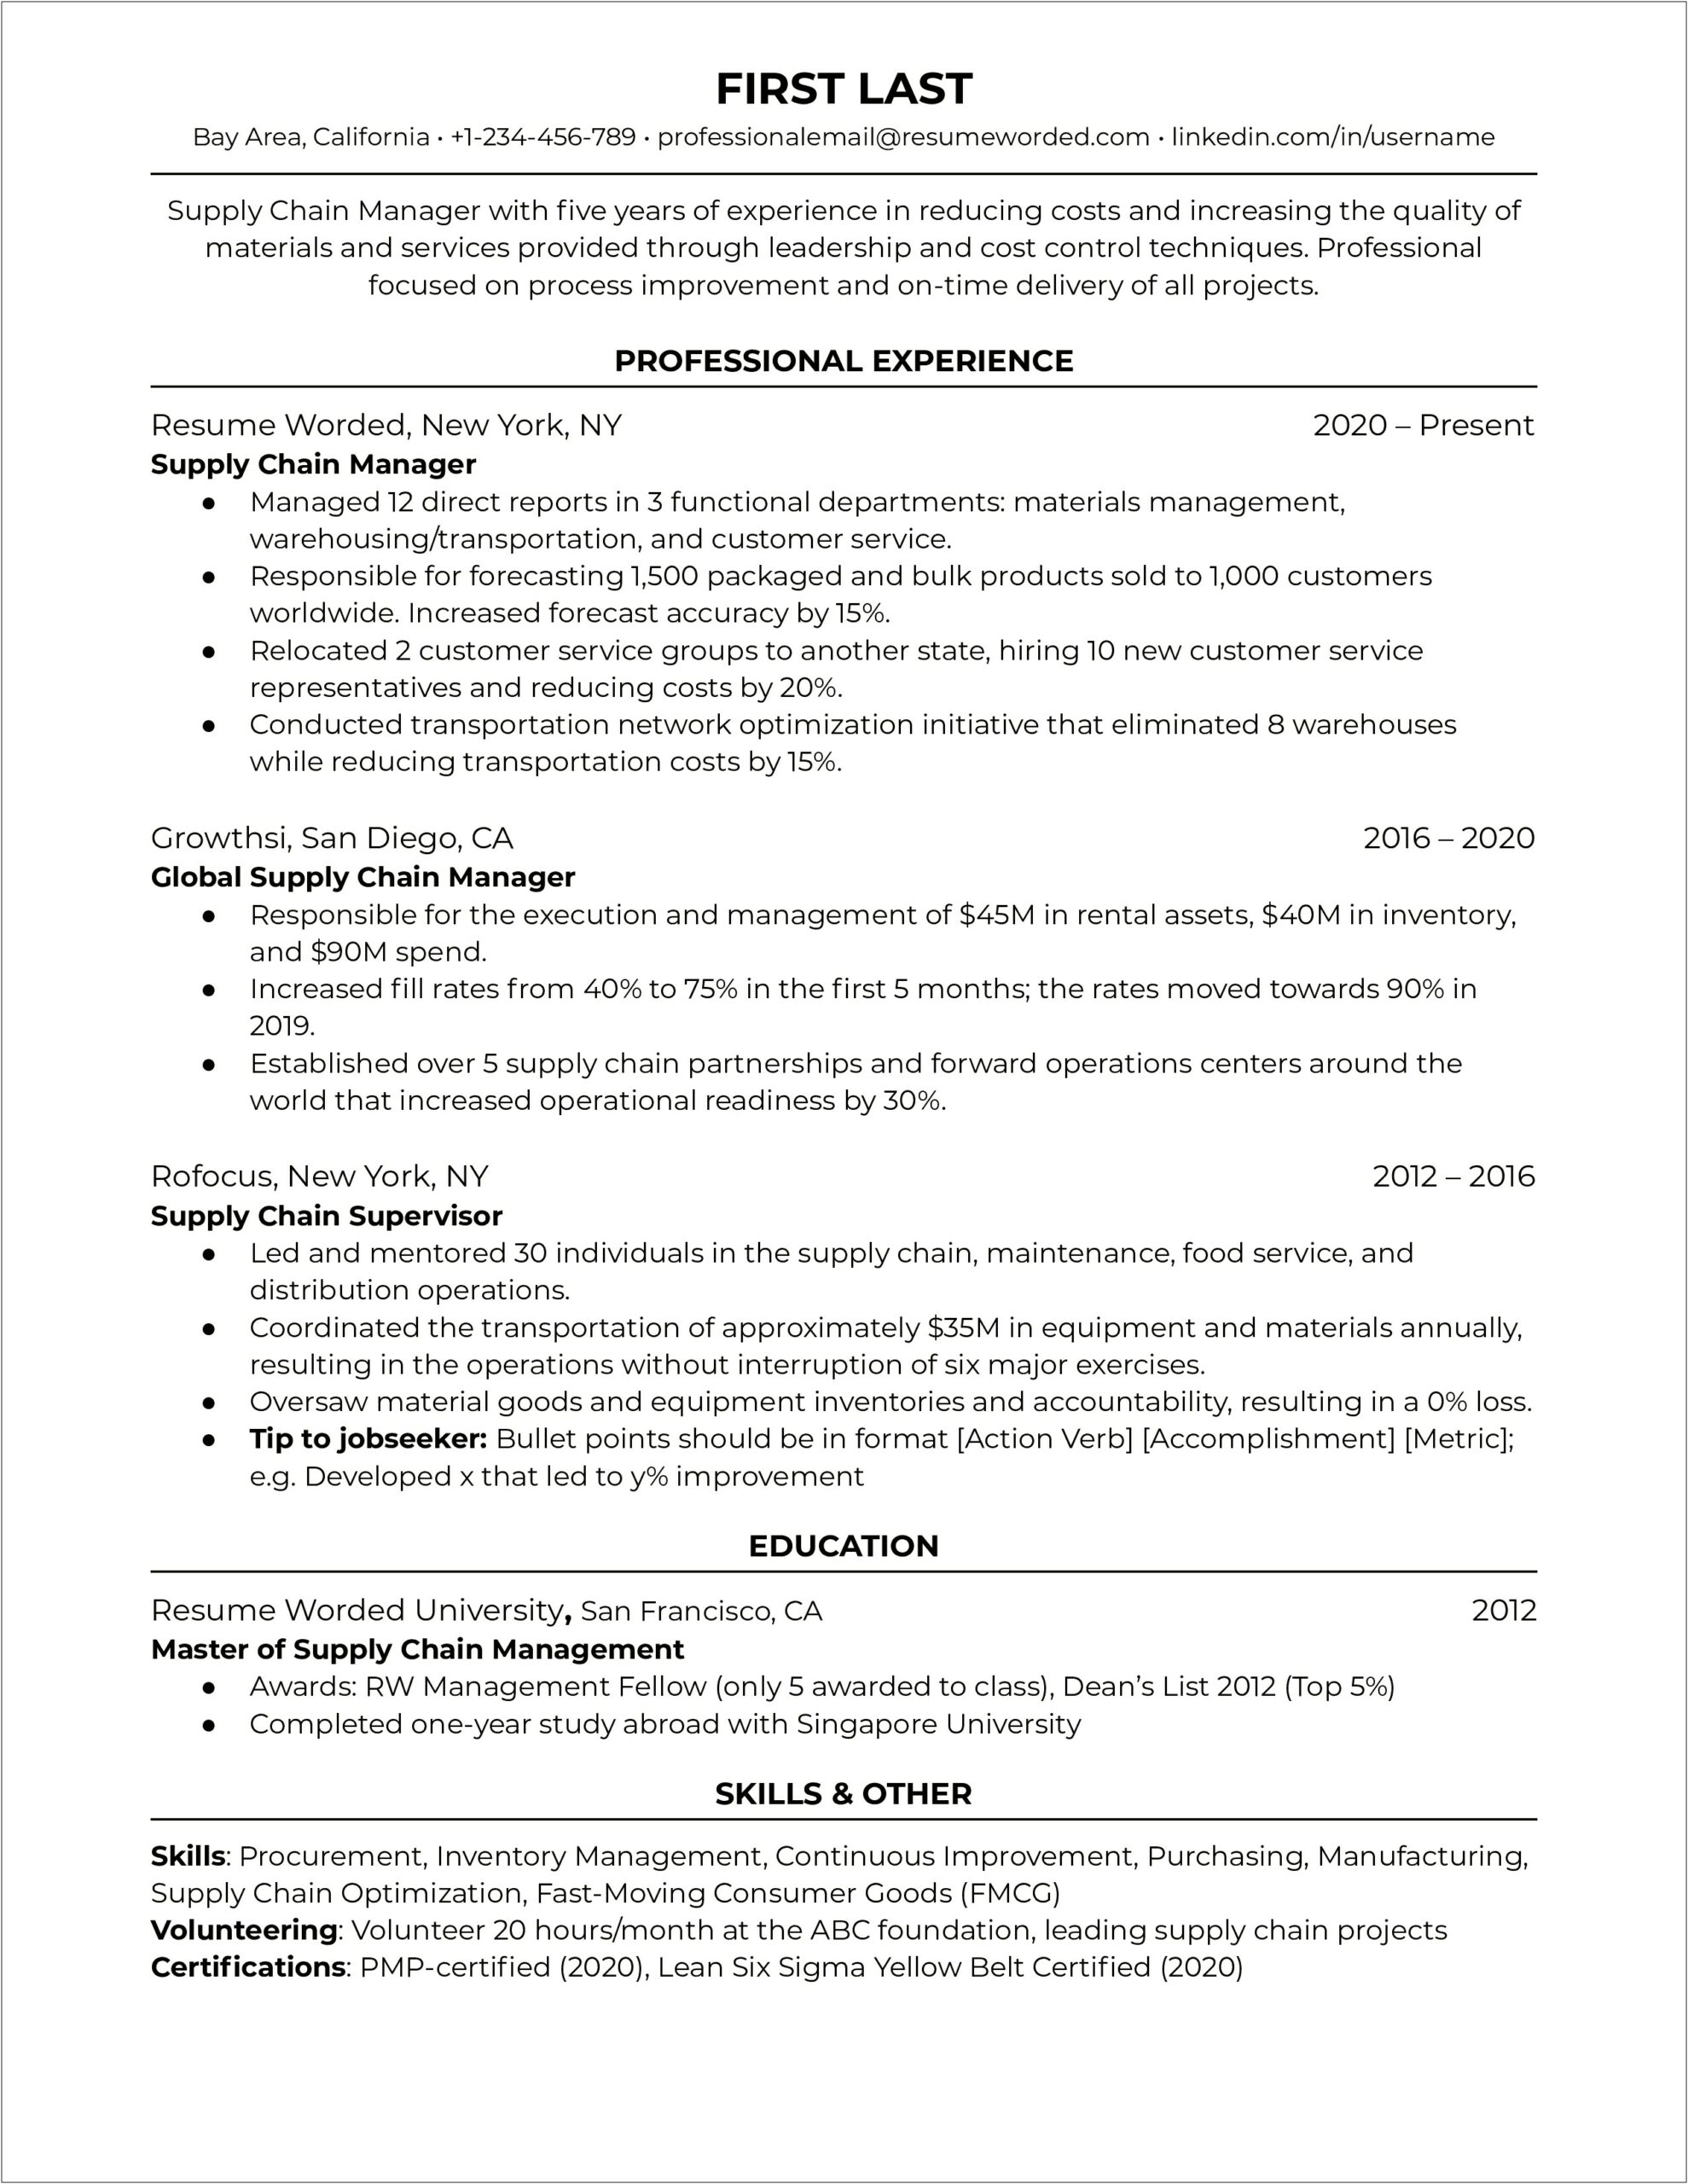 Supply Chain Entry Level Resume Samples